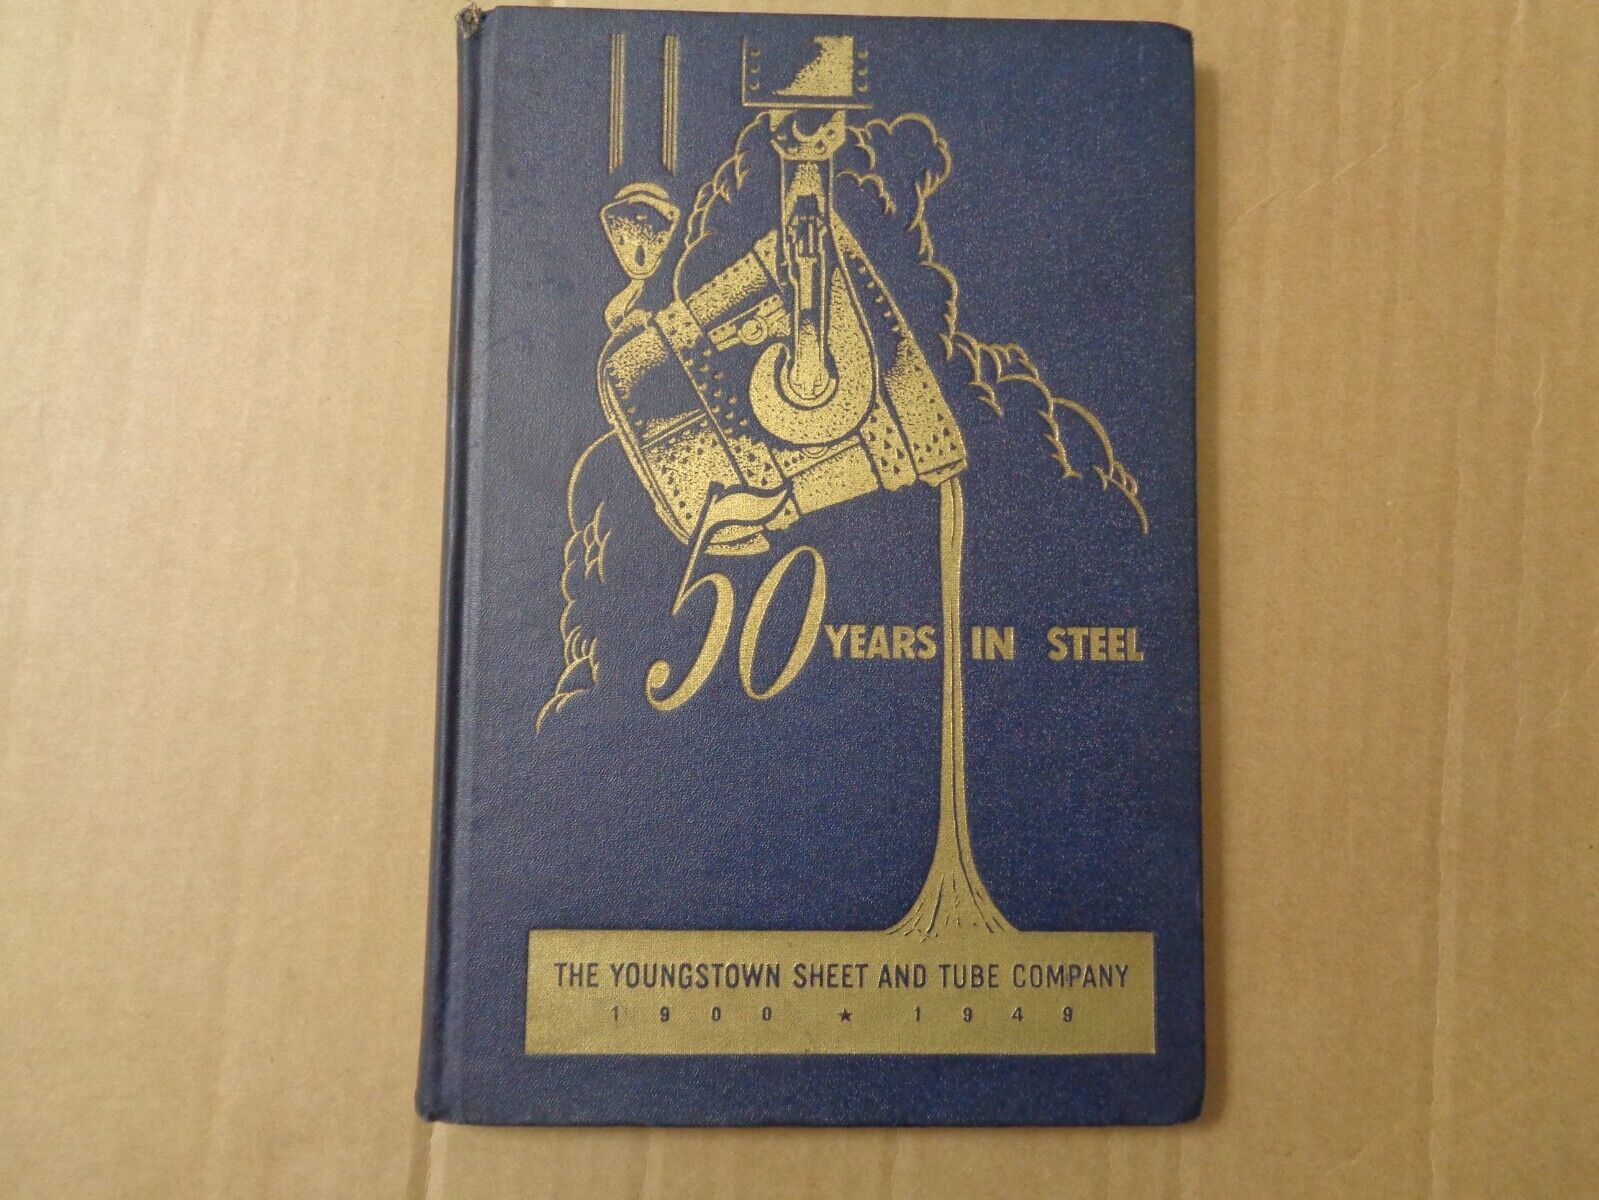 THE YOUNGSTOWN SHEET AND TUBE COMPANY-50 YEARS IN STEEL BOOK ( 1950 )